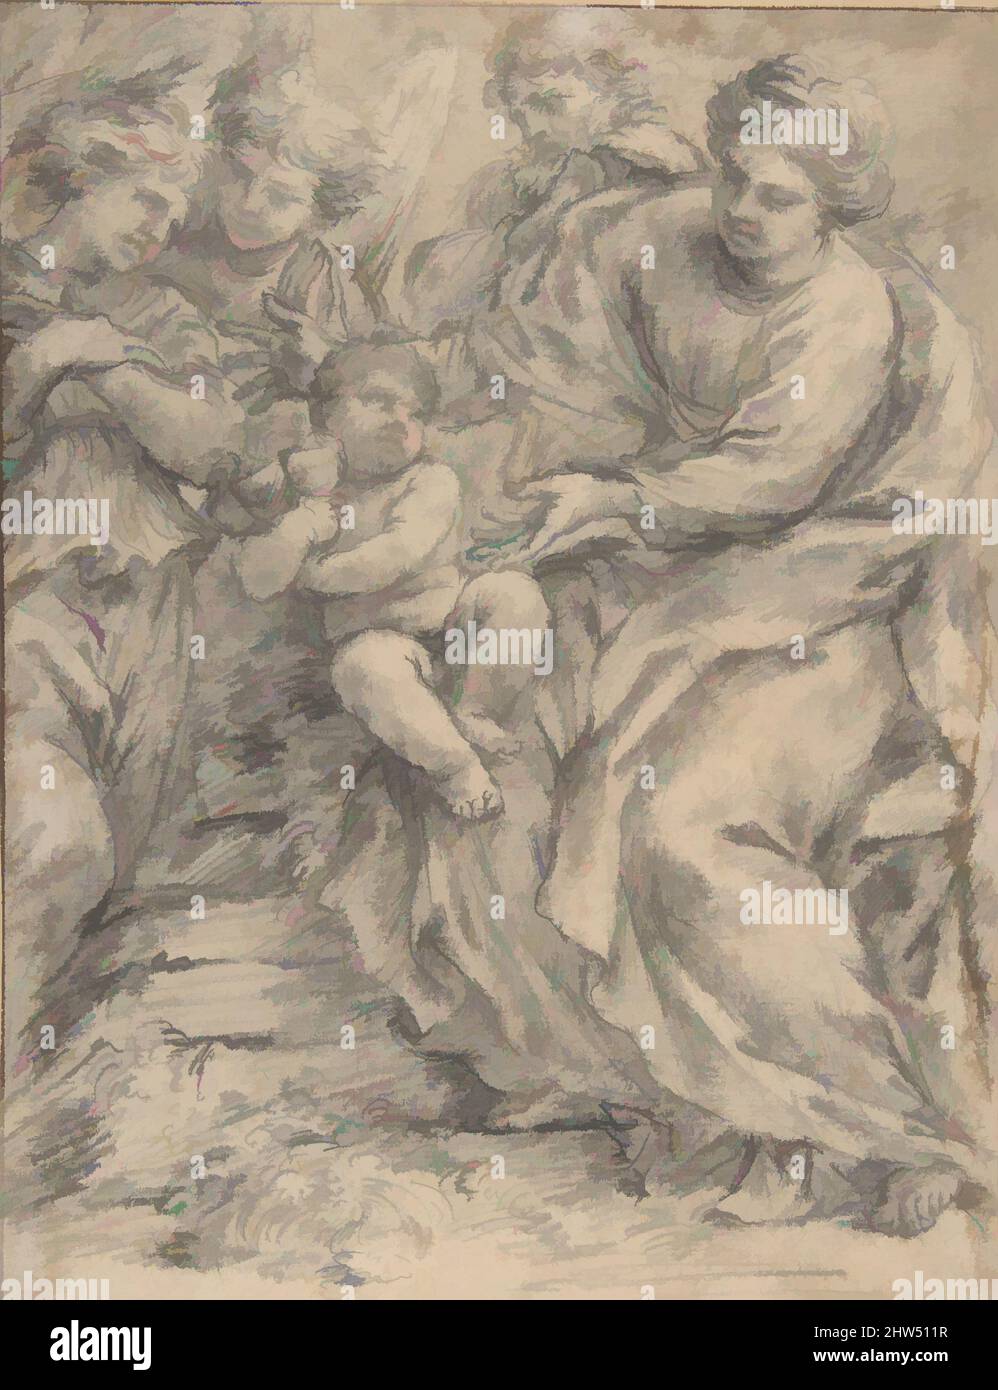 Art inspired by The Holy Family with Two Angels, 1598–1654, Black chalk on off-white laid paper; framing outline in pen and dark brown ink; glued onto a secondary paper support, 10-3/16 x 7-13/16 in. (25.9 x 19.8 cm), Drawings, Alessandro Algardi (Italian, Bologna 1598–1654 Rome, Classic works modernized by Artotop with a splash of modernity. Shapes, color and value, eye-catching visual impact on art. Emotions through freedom of artworks in a contemporary way. A timeless message pursuing a wildly creative new direction. Artists turning to the digital medium and creating the Artotop NFT Stock Photo